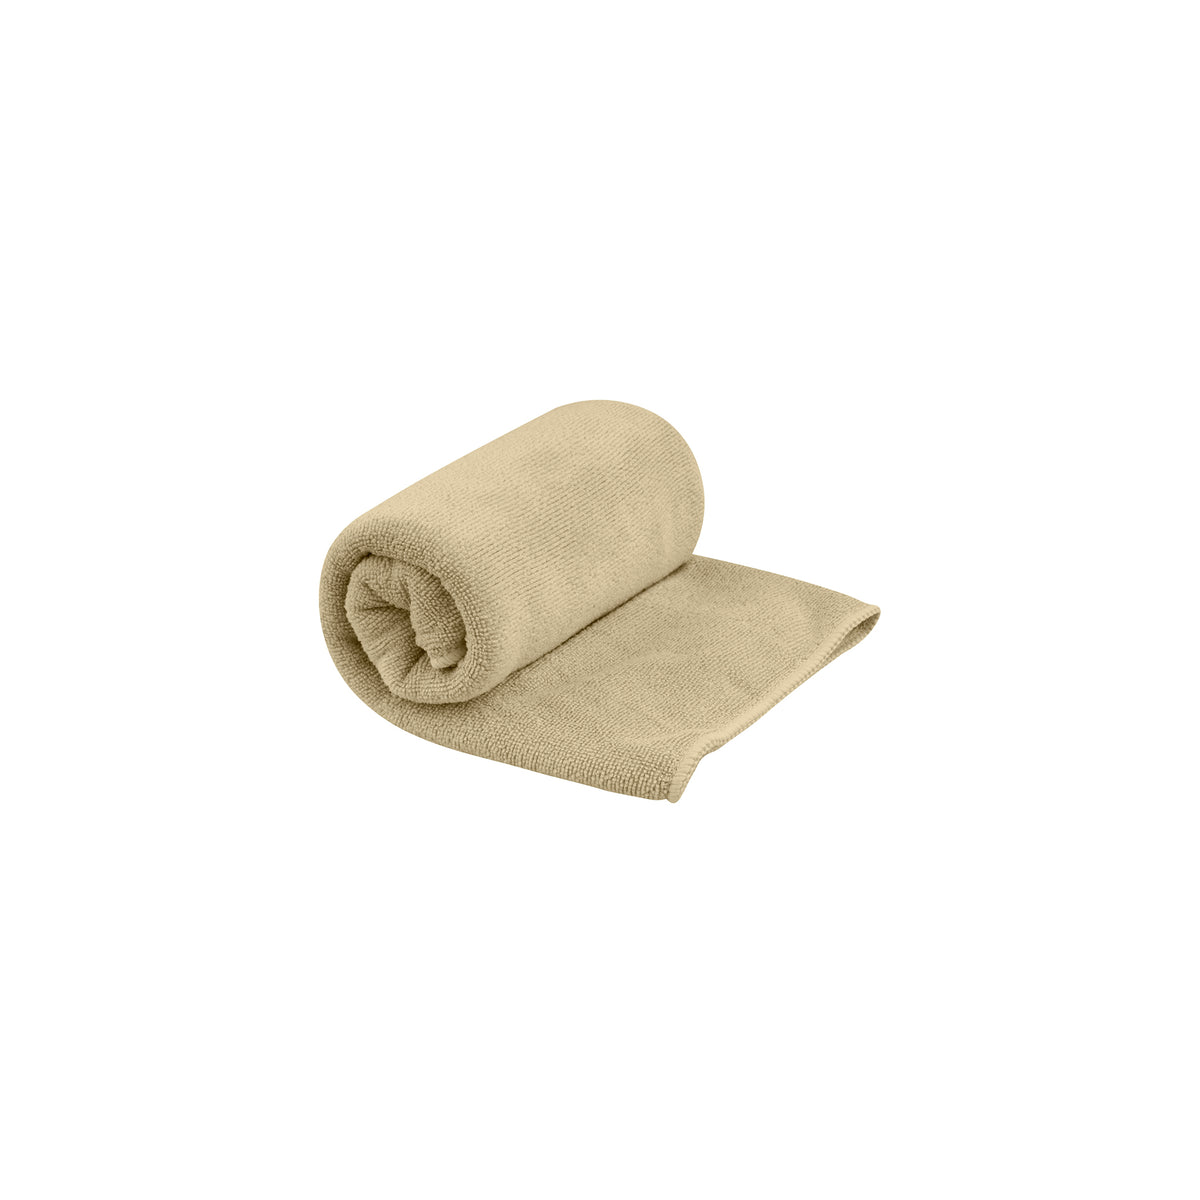 Brown and Gold Reusable Paper Towel Set